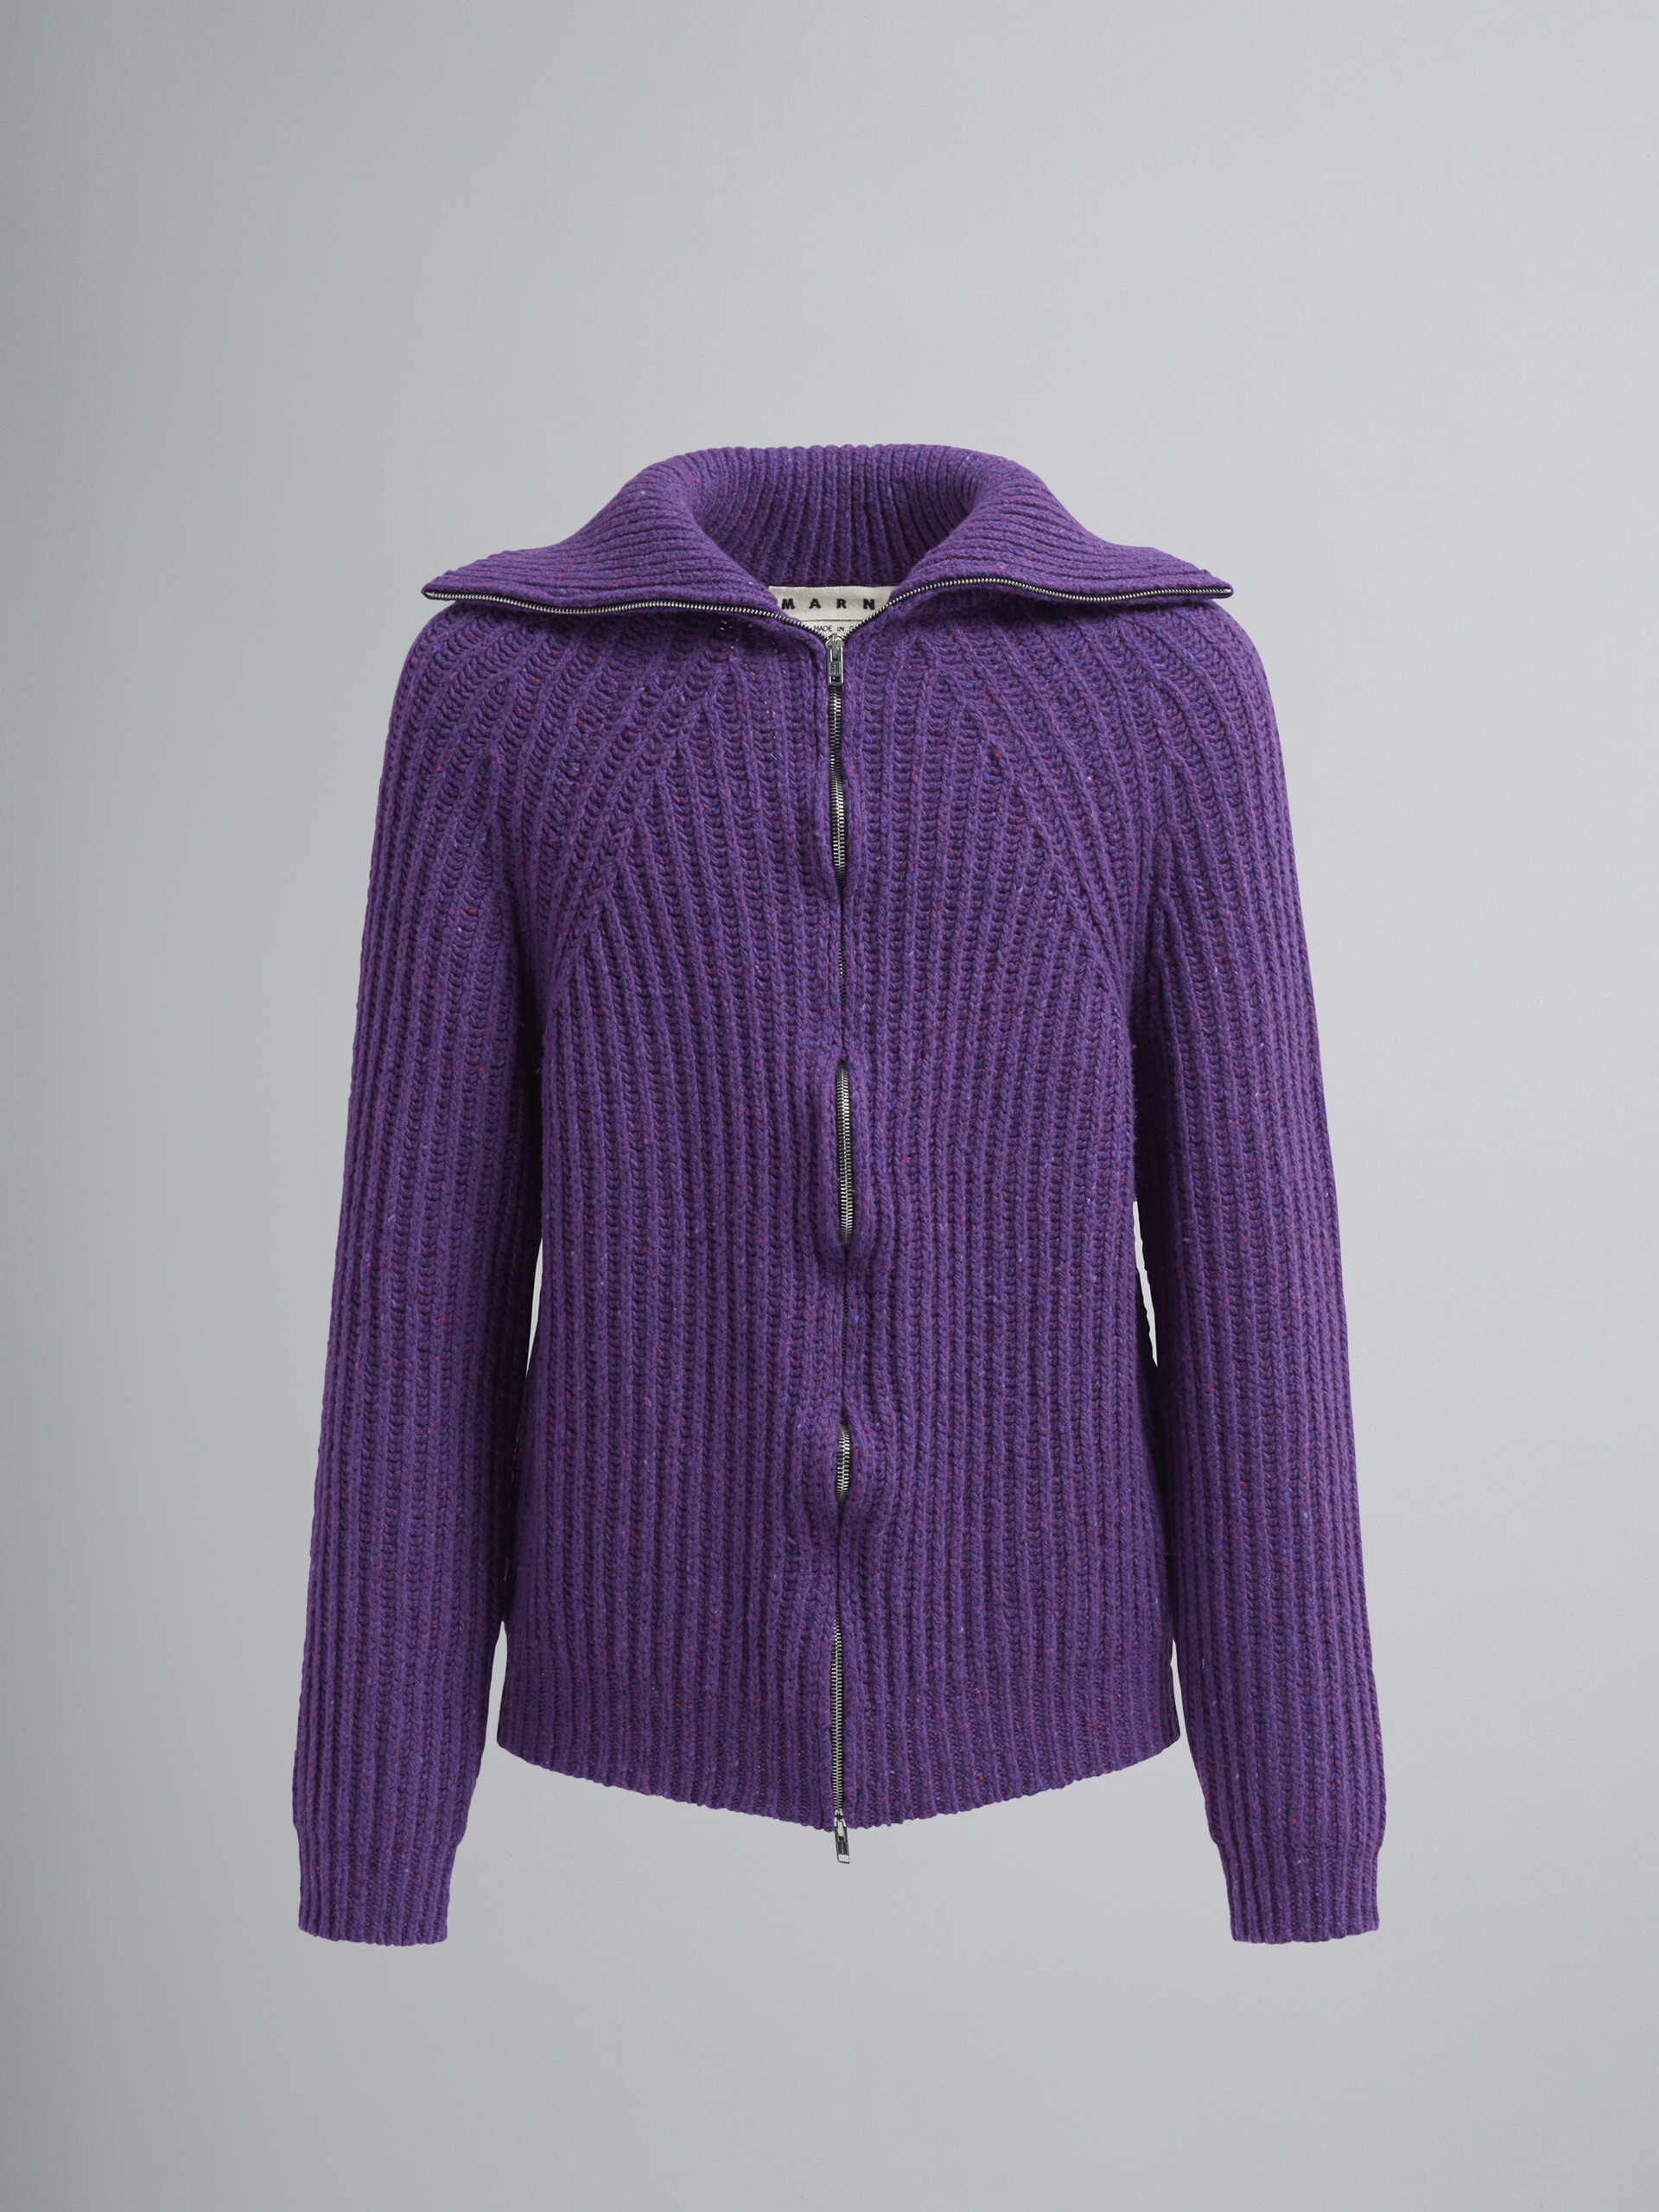 Recycled wool cardigan - Pullovers - Image 1